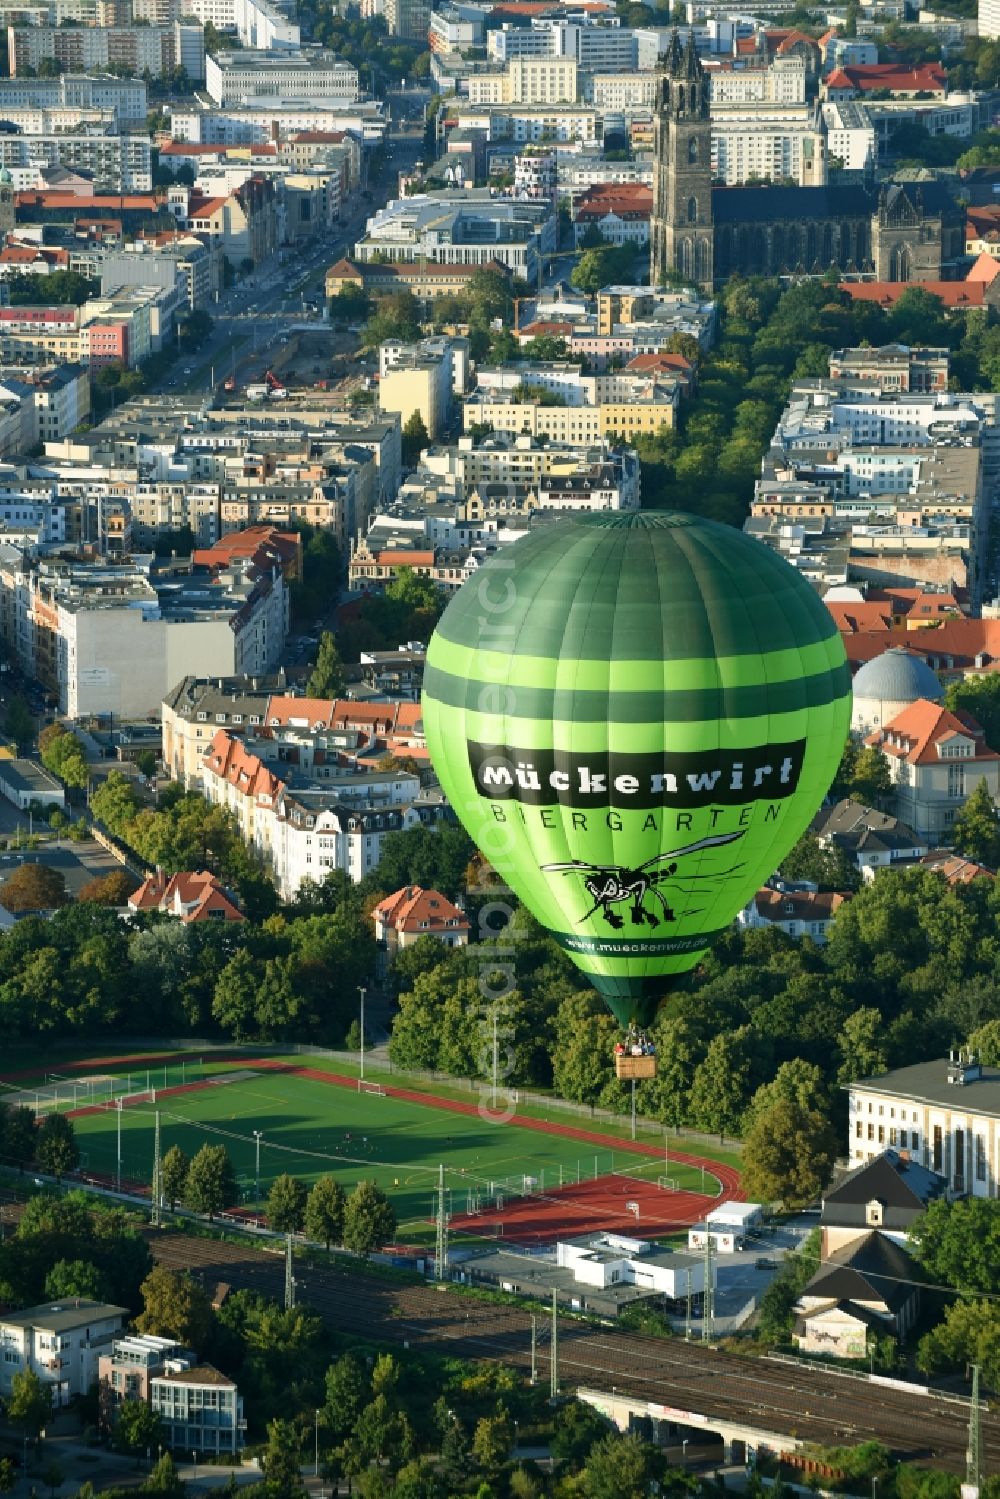 Aerial image Magdeburg - Hot air balloon with of Kennung D-OEKY Mueckenwirt flying in the airspace in Magdeburg in the state Saxony-Anhalt, Germany